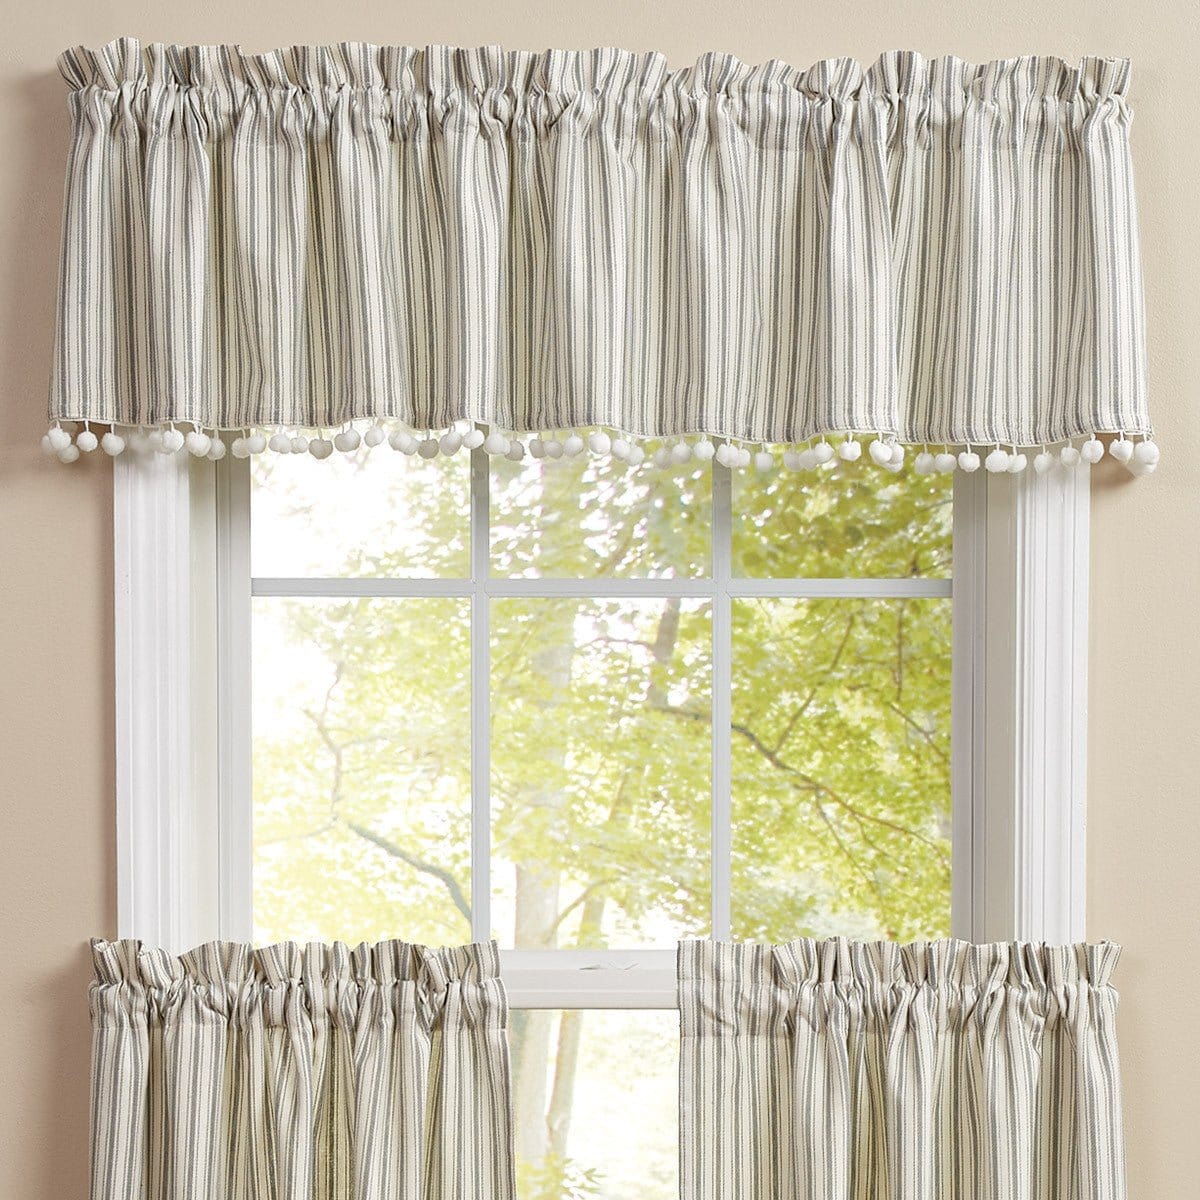 Ticking with Ball Fringe Valance Unlined-Park Designs-The Village Merchant